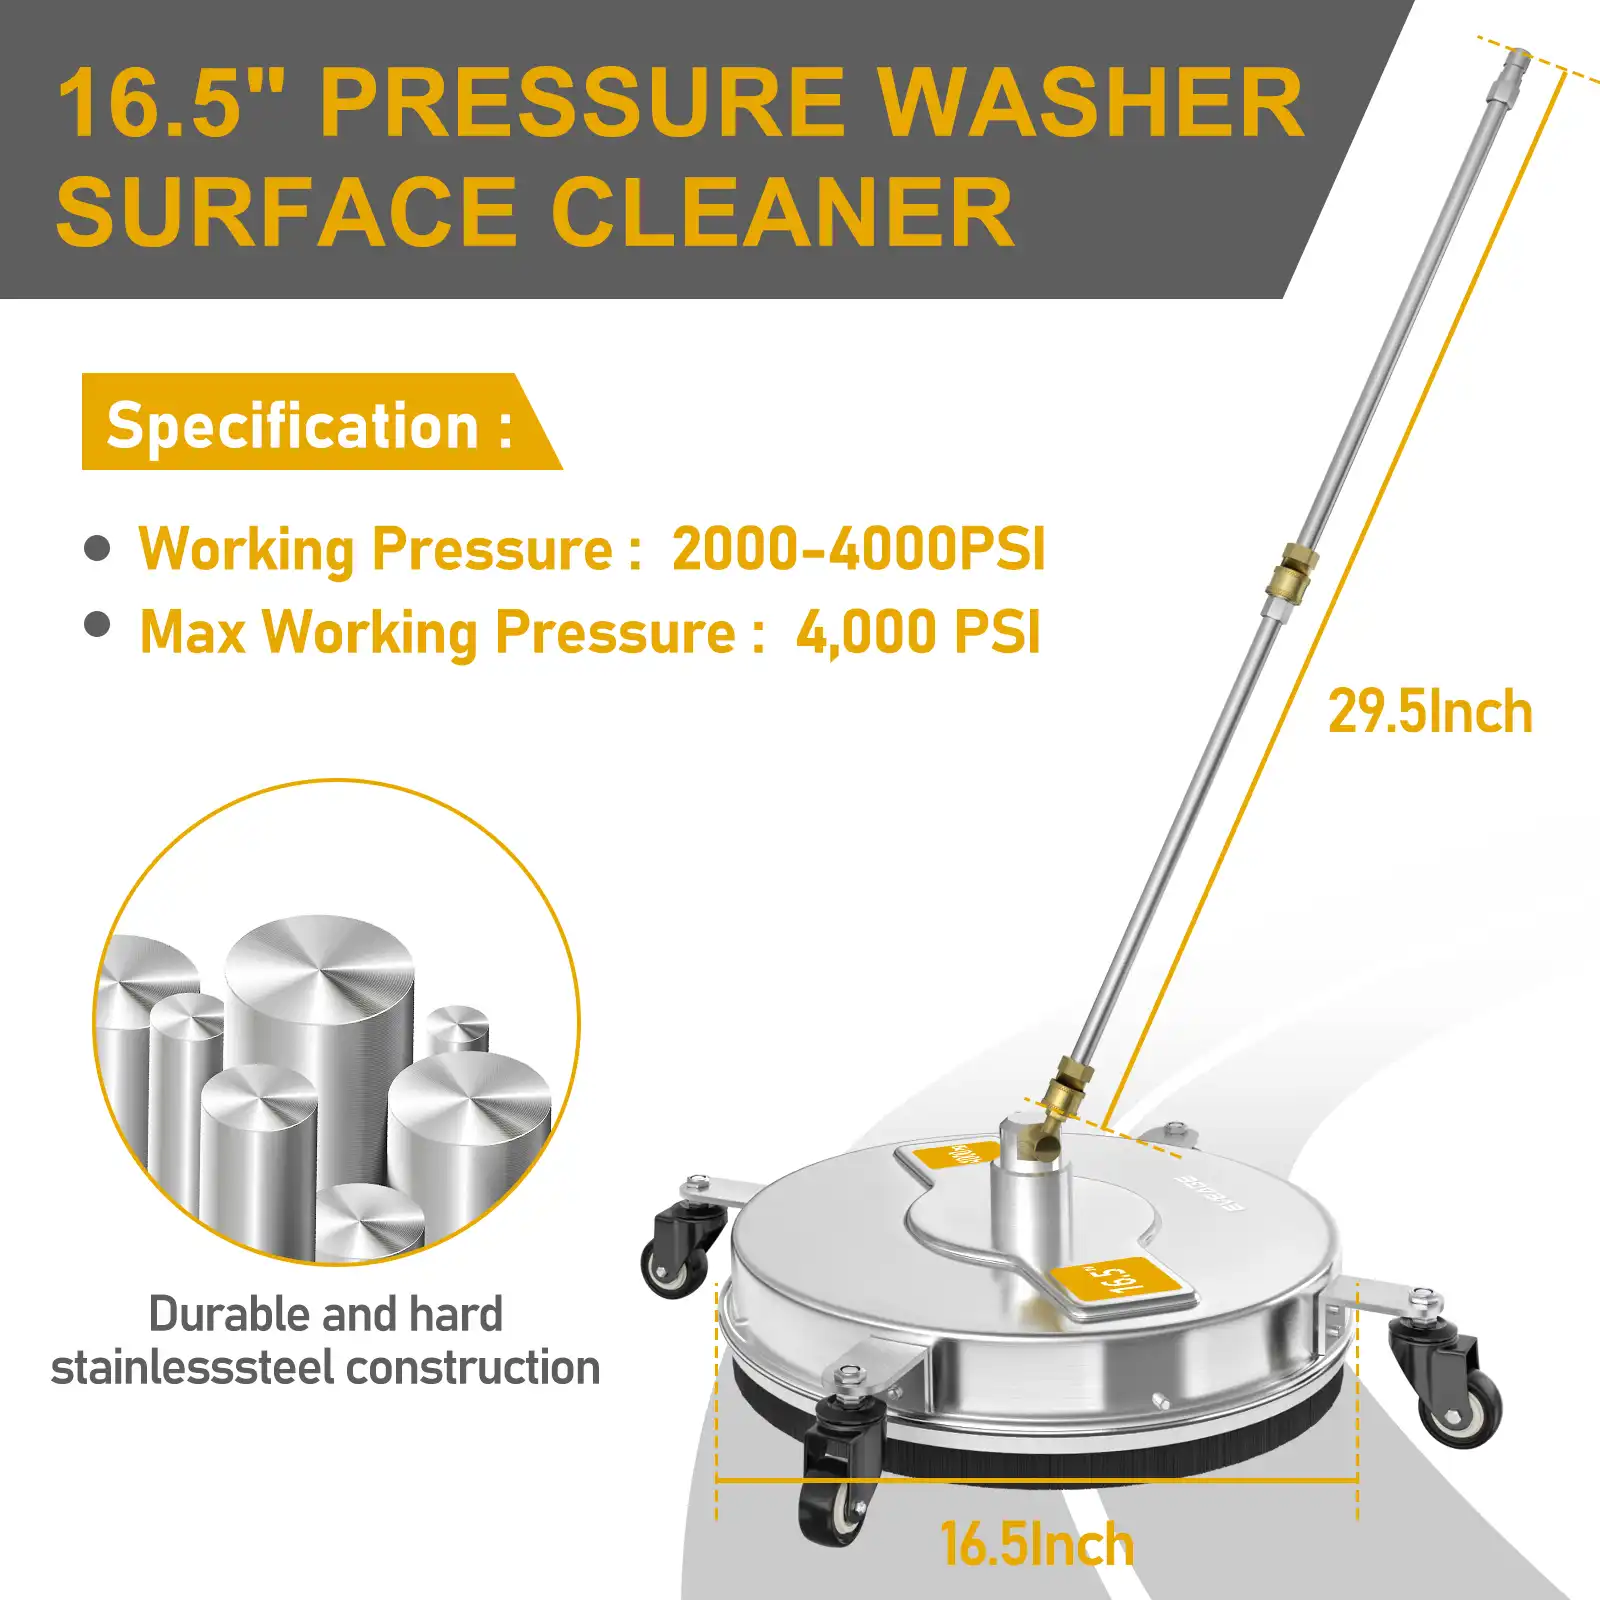 pressure washer with surface cleaner